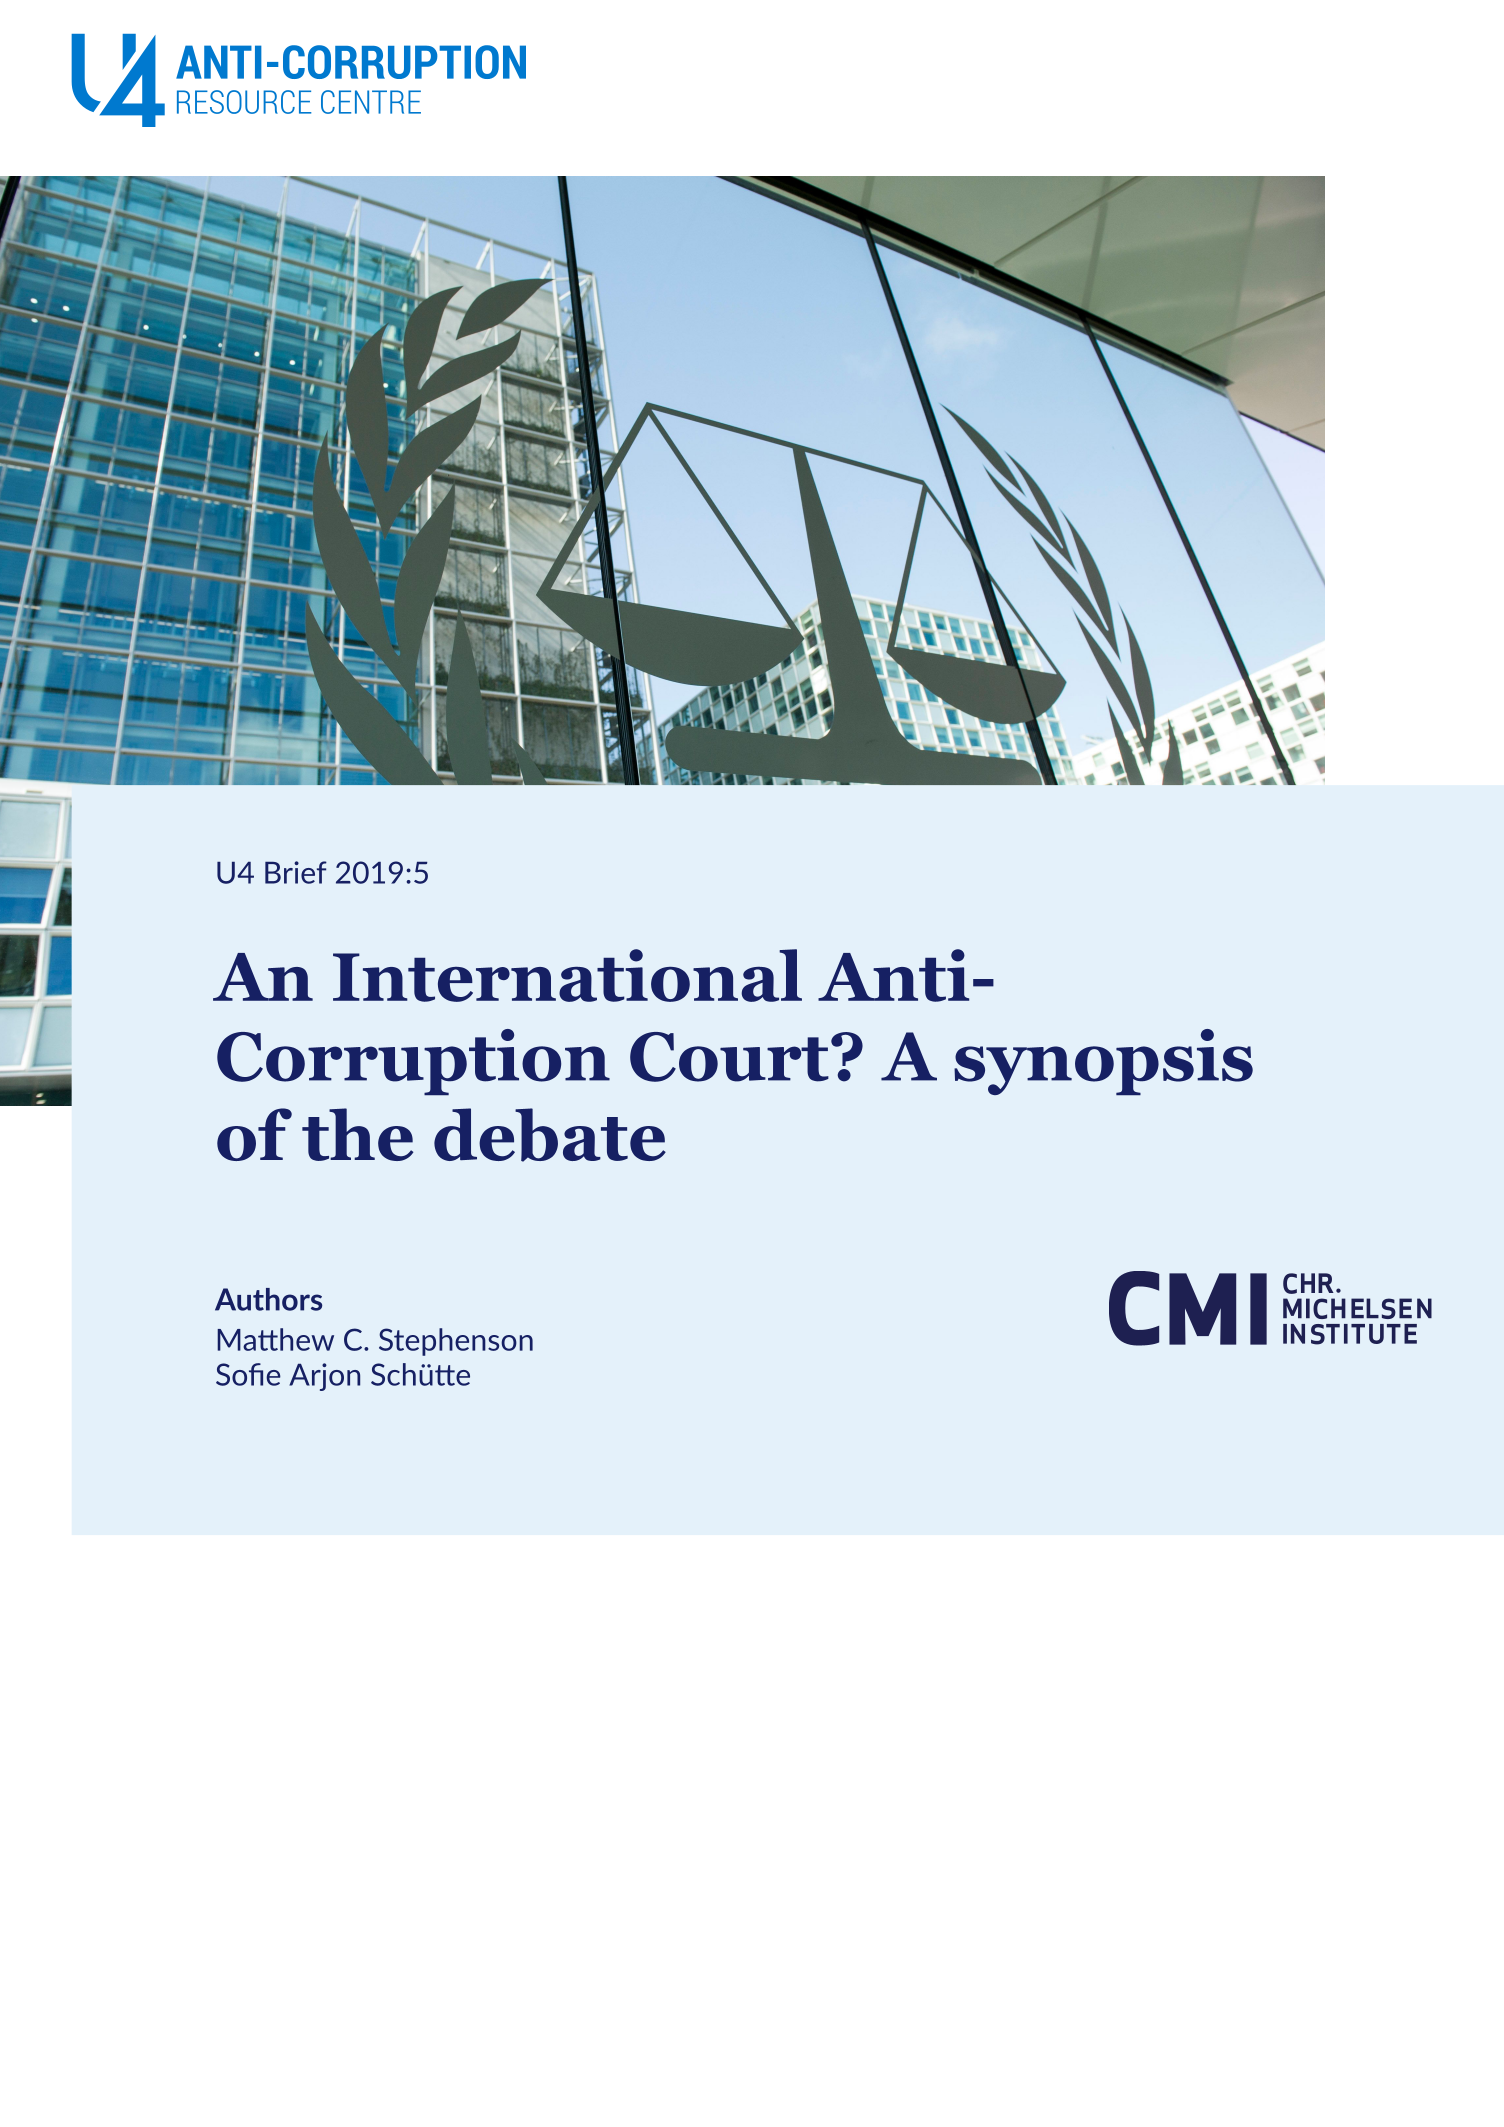 An International Anti-Corruption Court? A synopsis of the debate